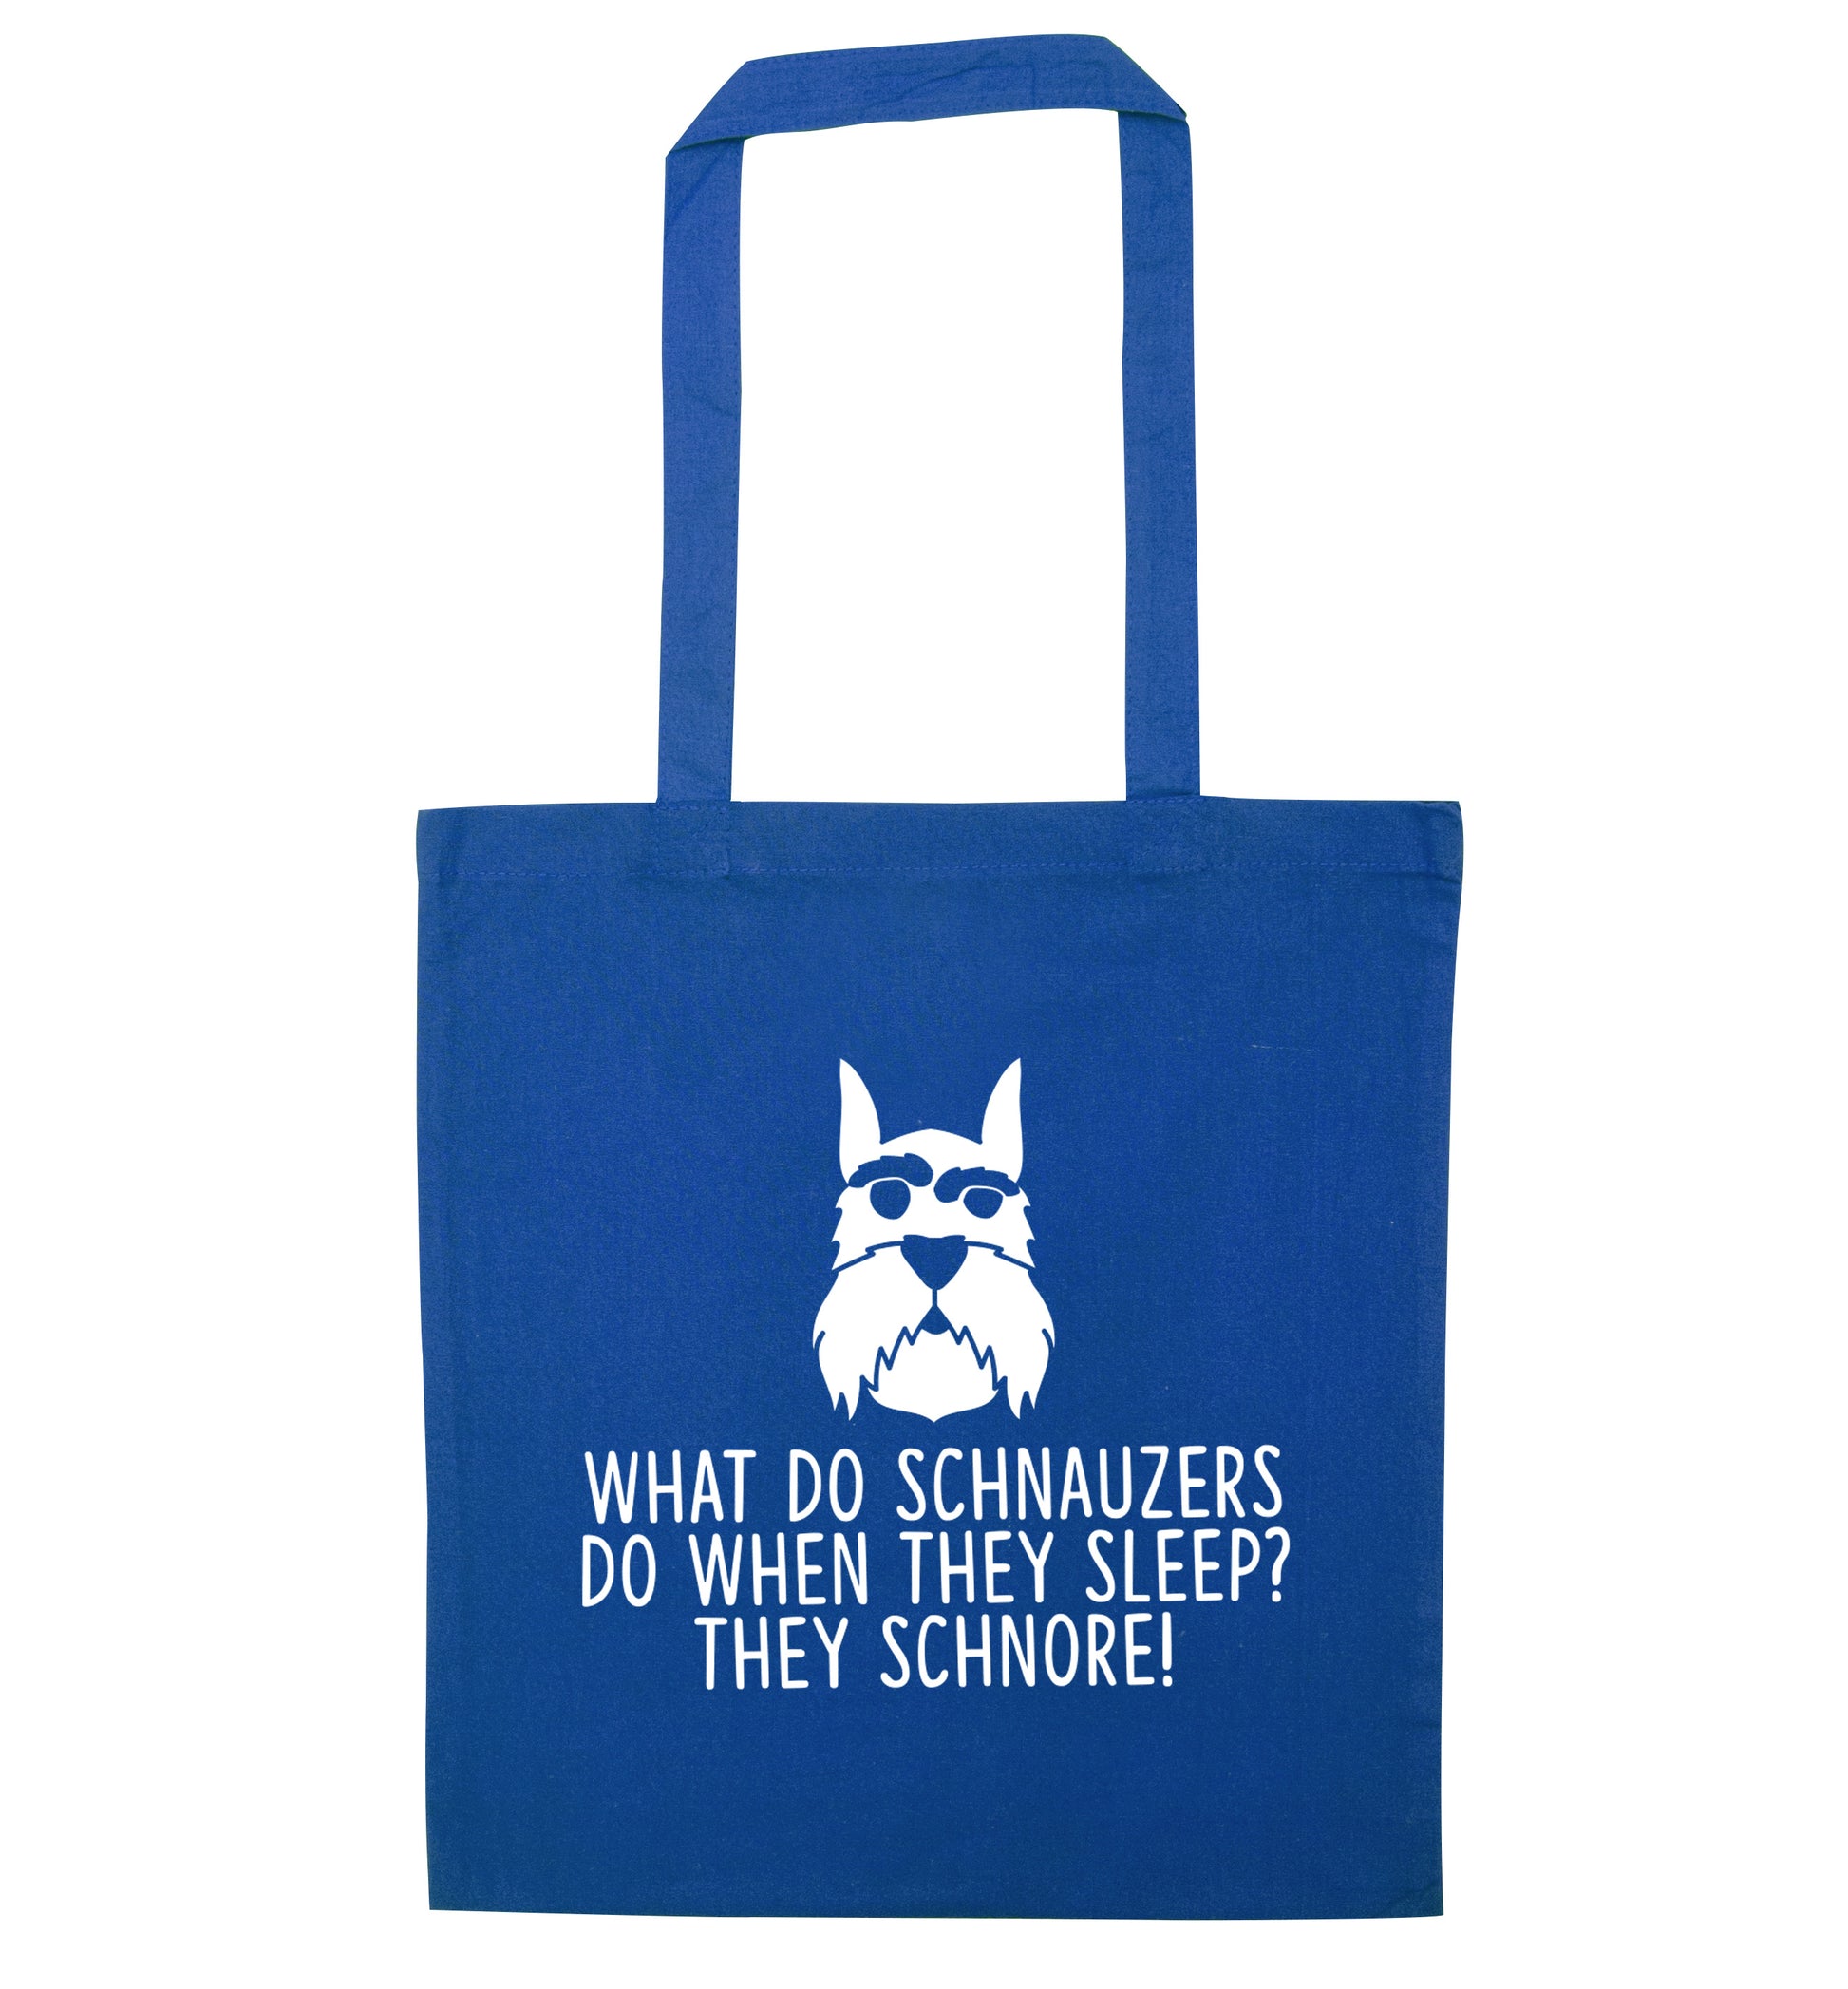 What do schnauzers do when they sleep? Schnore! blue tote bag